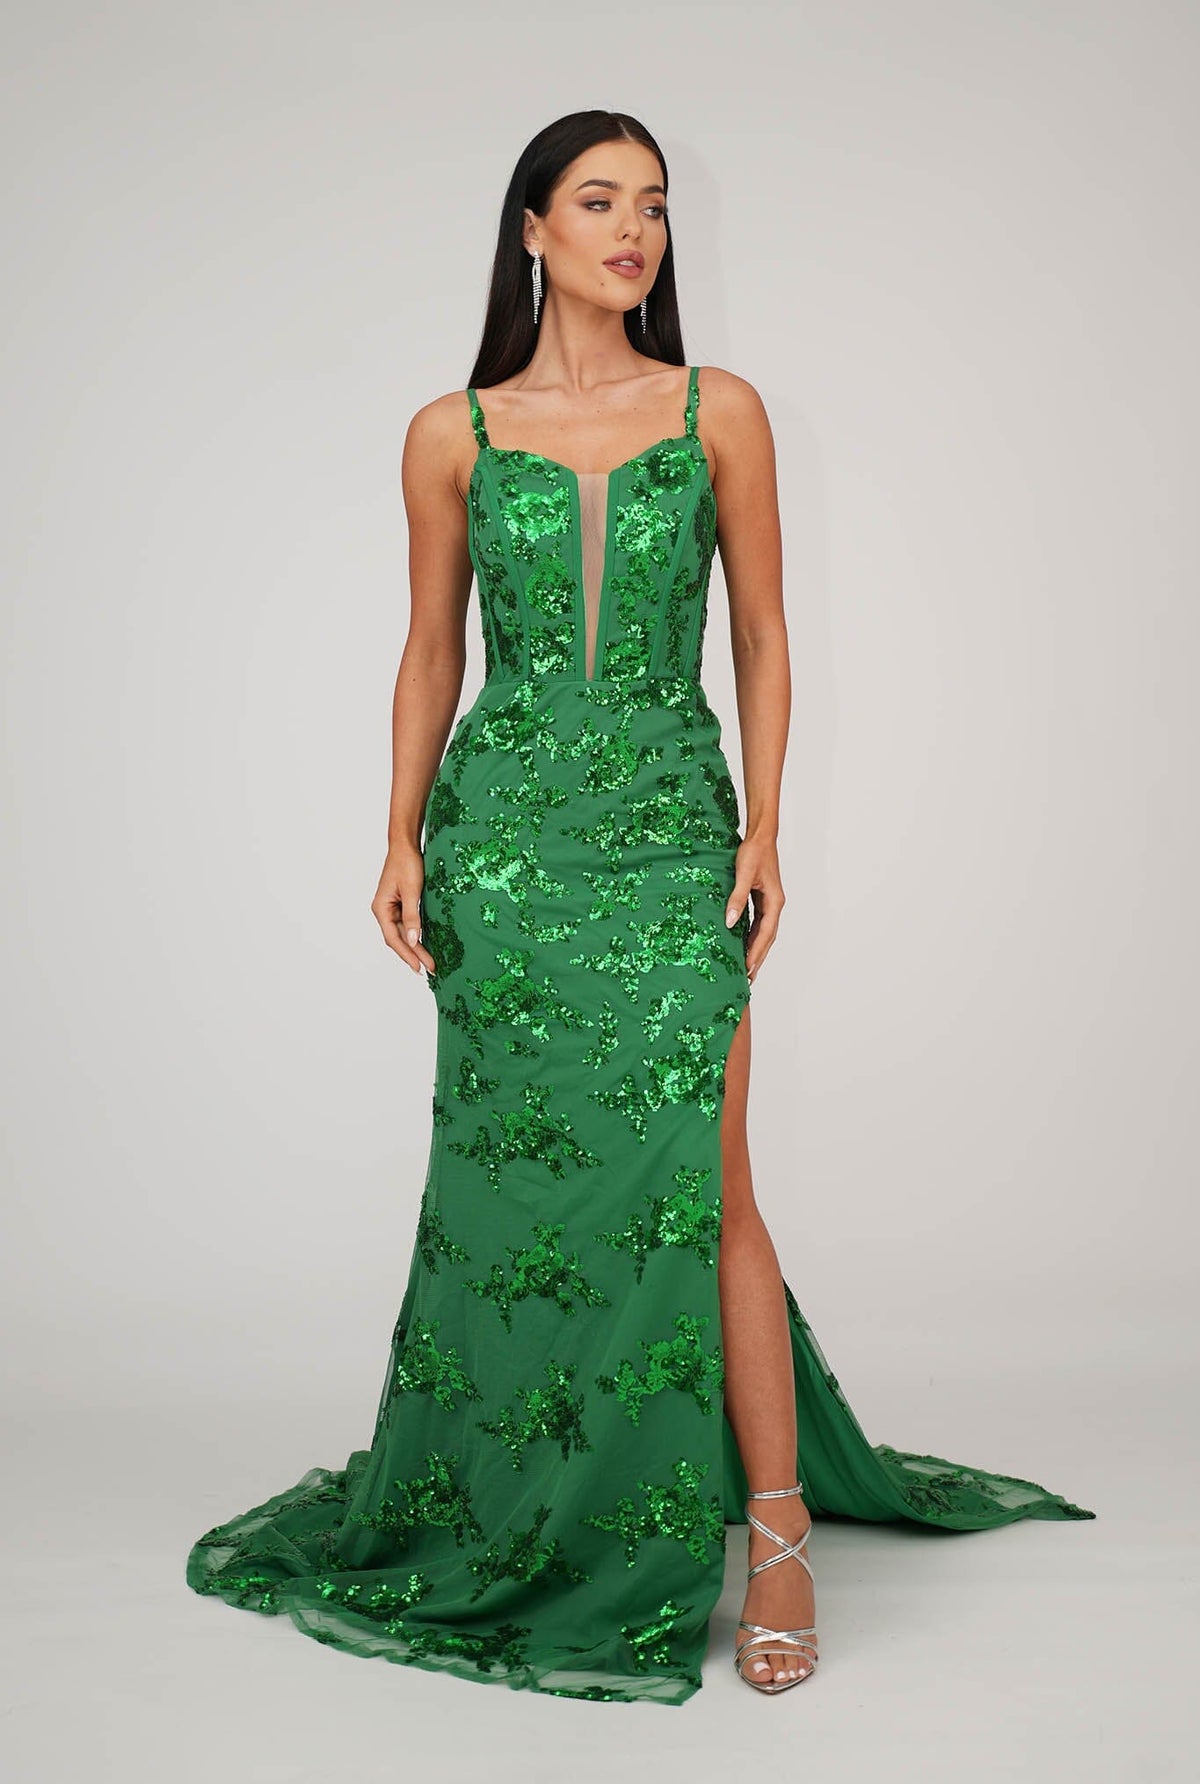 Bright Green Floral Embellished Sequins Floor Length Evening Gown with Corset Bodice, Mesh Insert, Side Slit and Lace Up Open Back